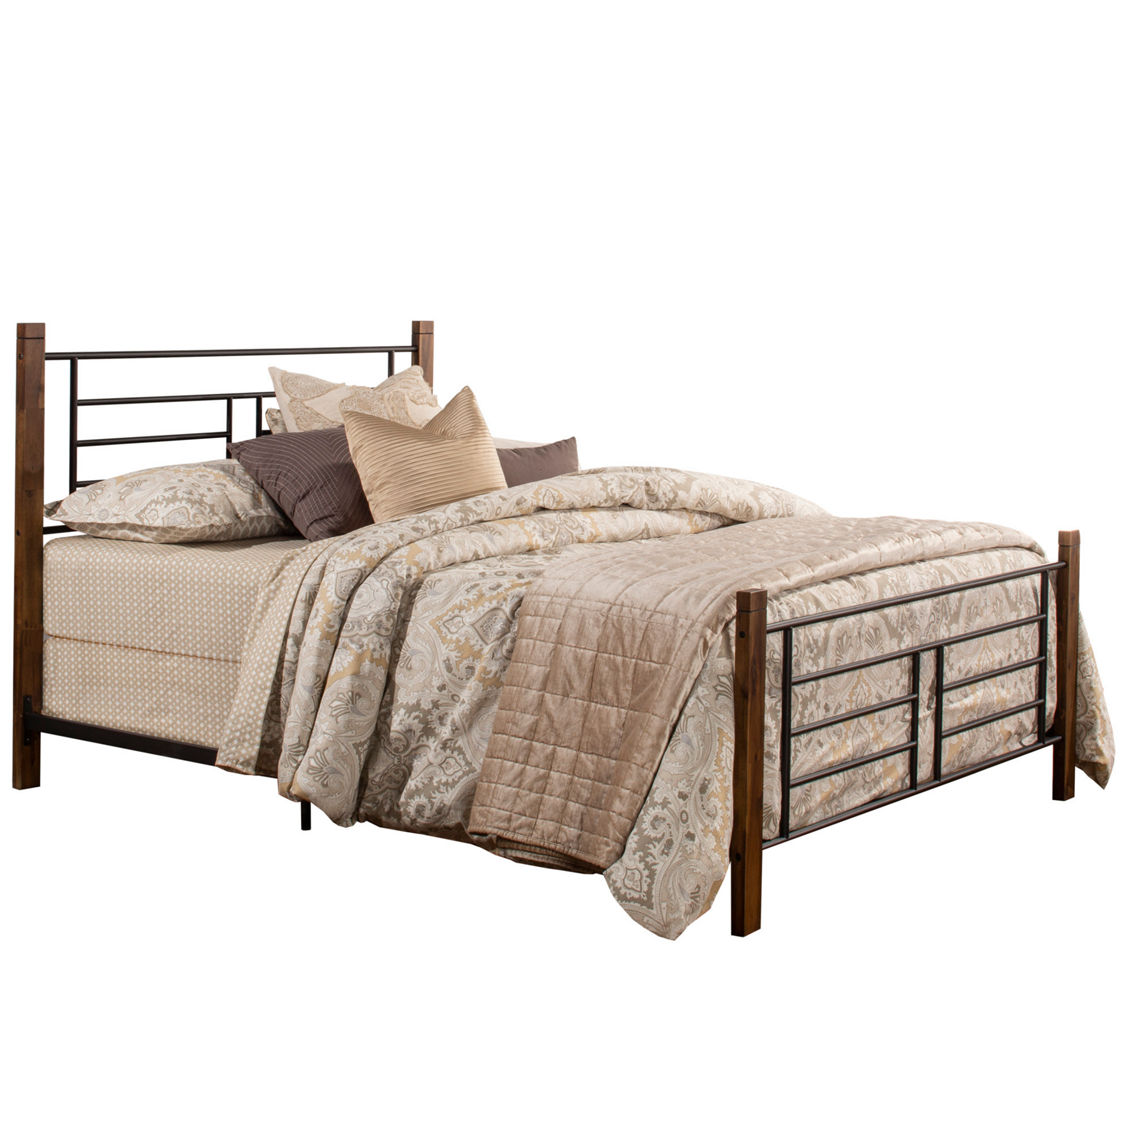 Hillsdale Furniture Raymond Metal Bed - Image 2 of 4